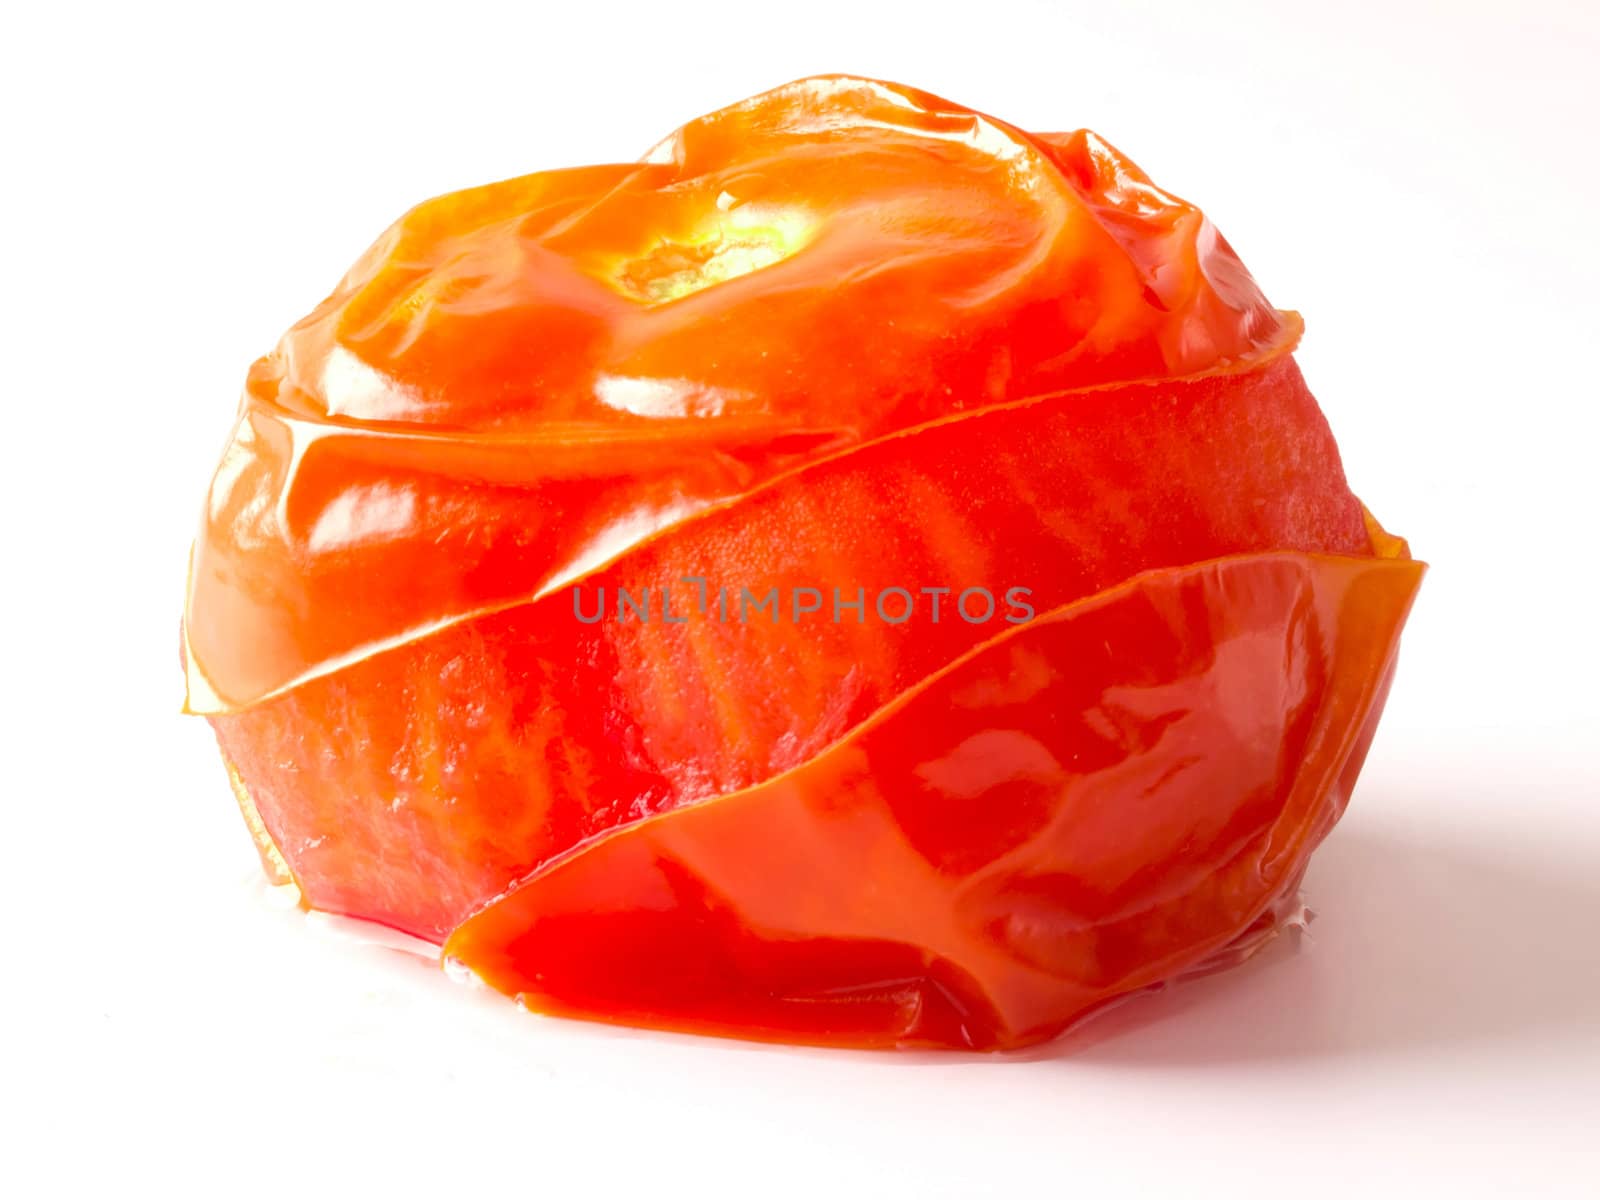 baked tomato by zkruger